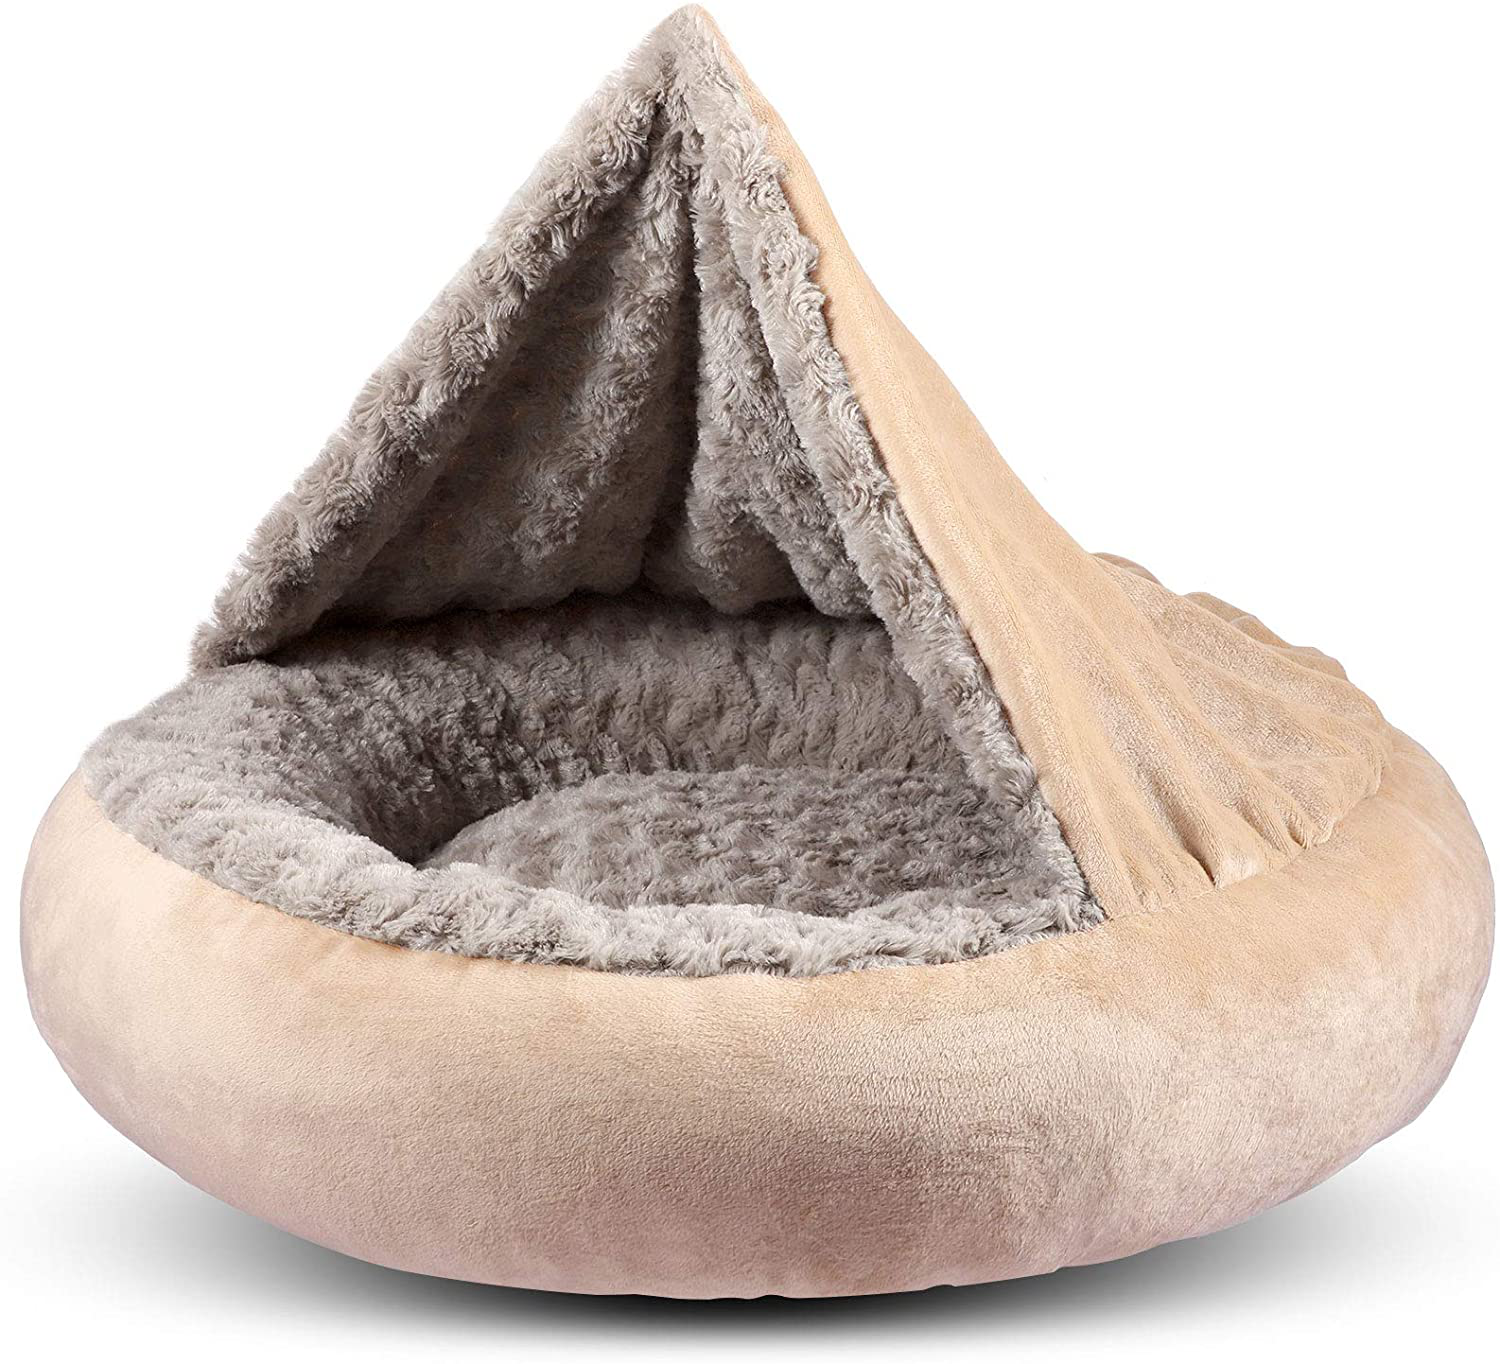 GASUR Cozy Cuddler Small Dog and Cat Bed, round Donut Calming Anti-Anxiety Cave Hooded Blanket Pet Bed, Luxury Orthopedic Cushion Beds for Indoor Kitty or Puppy, Warmth and Machine Washable 23 Inch